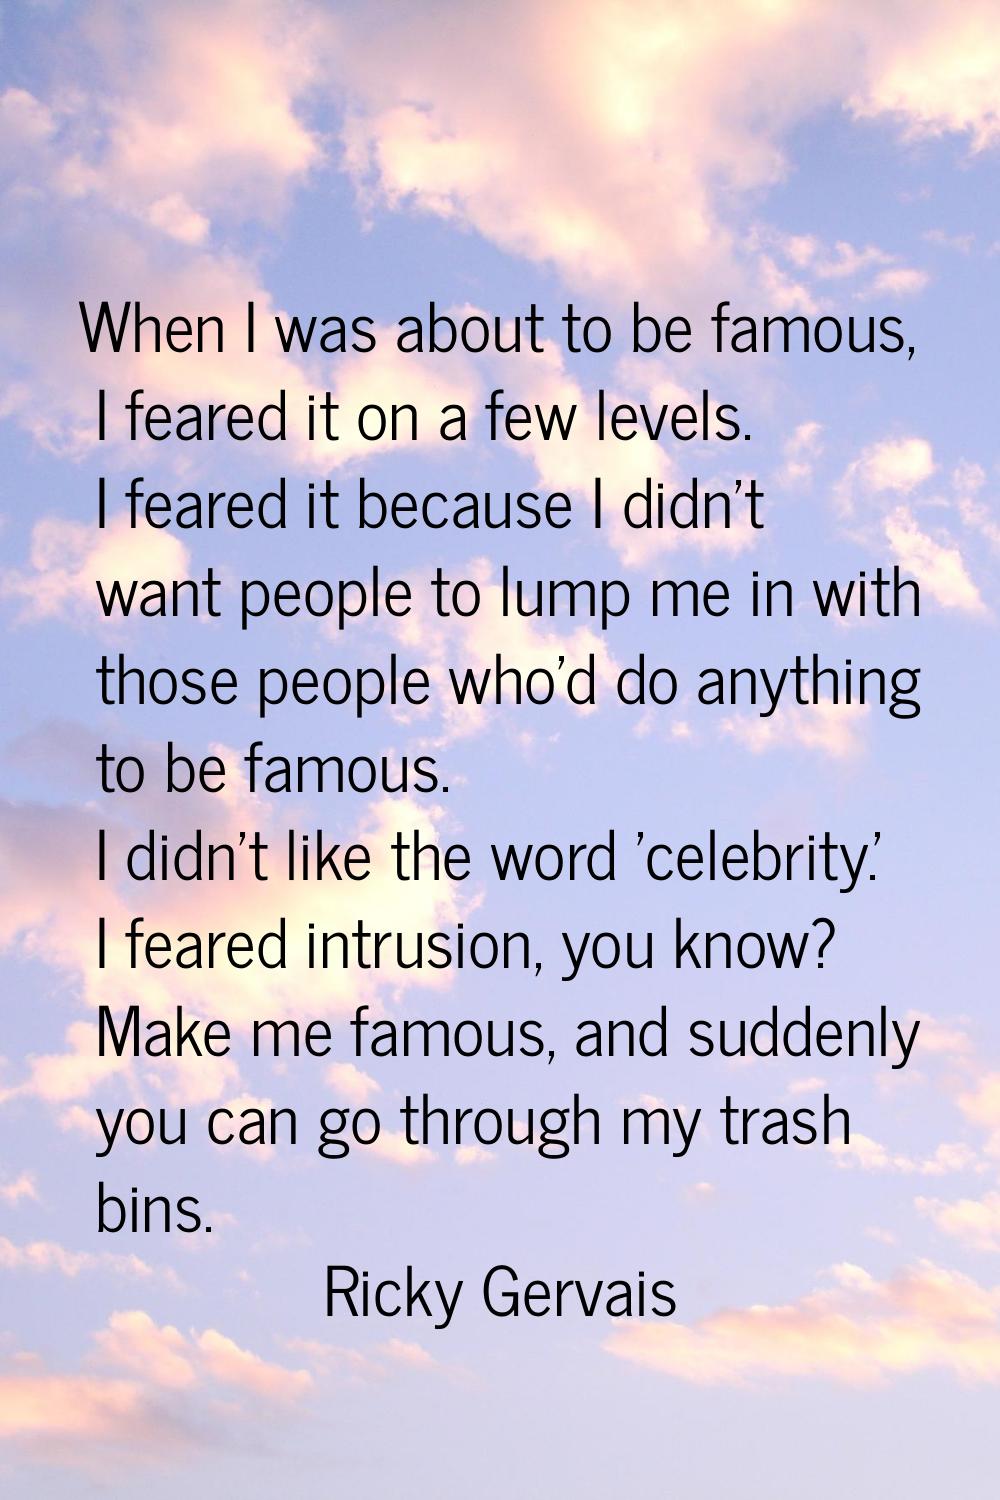 When I was about to be famous, I feared it on a few levels. I feared it because I didn't want peopl